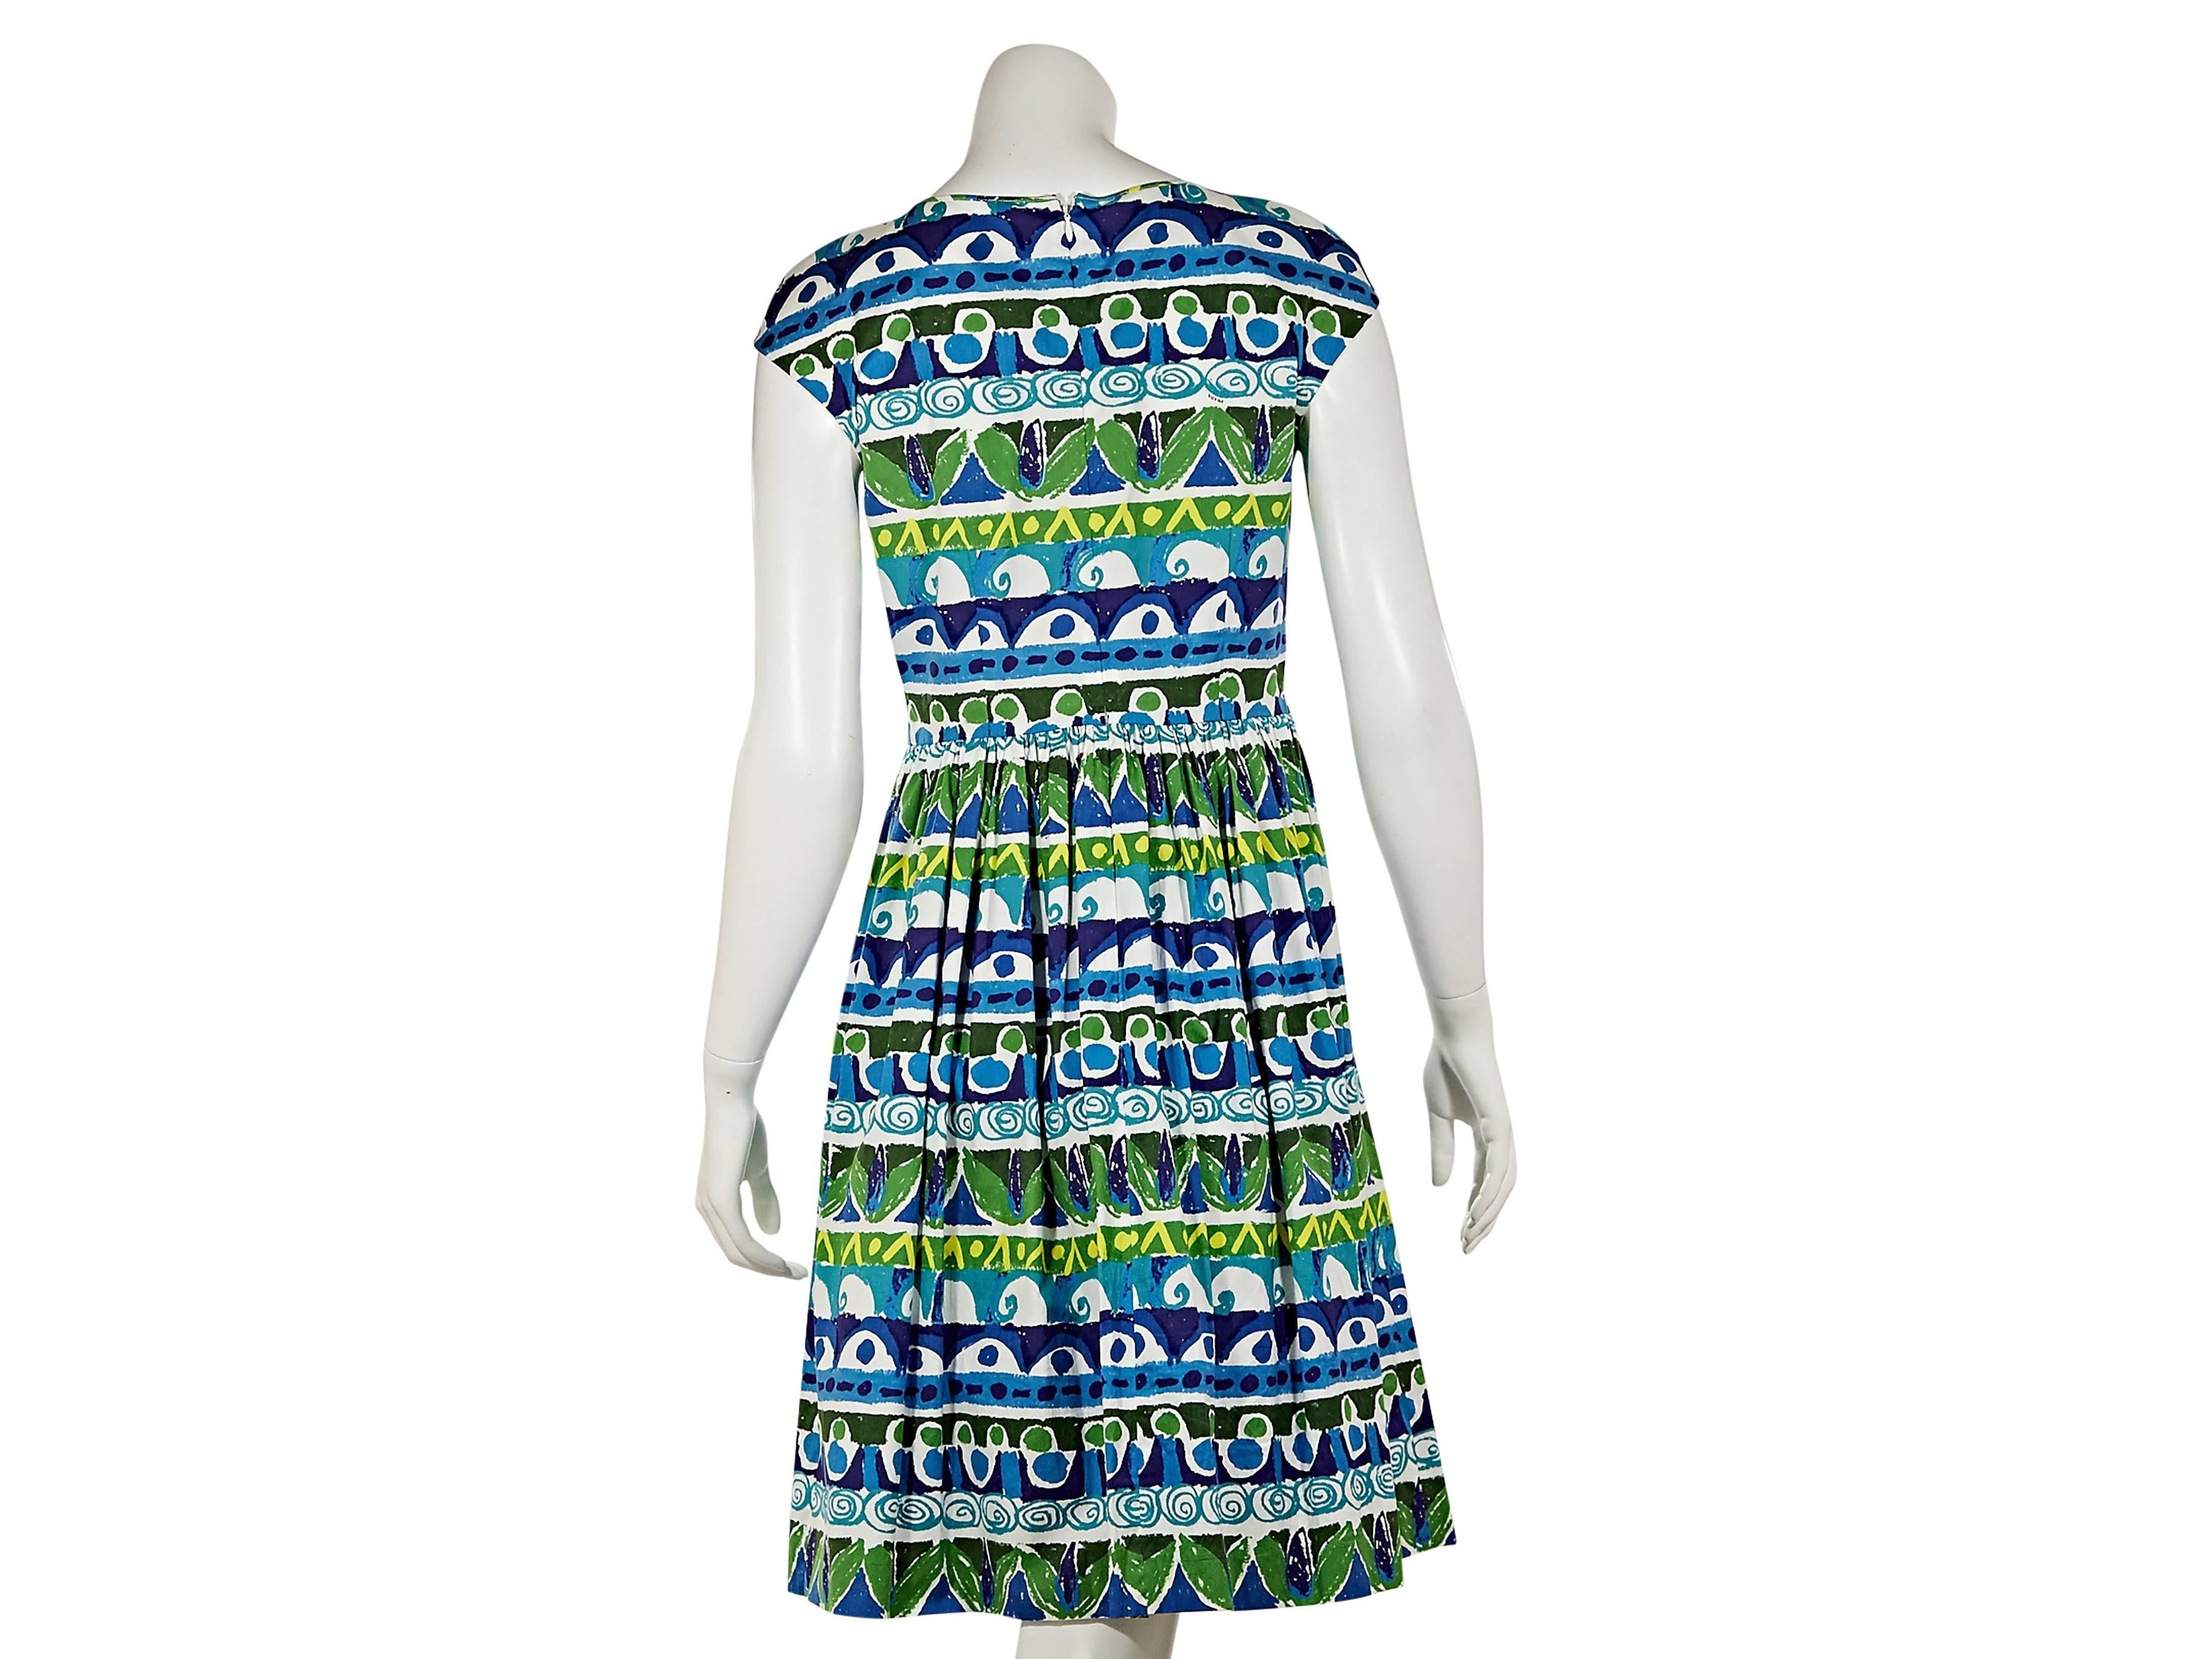 Multicolor printed fit-and-flare dress by Prada.  Scoopneck with smocking.  Cap sleeves.  Concealed back zip closure.  